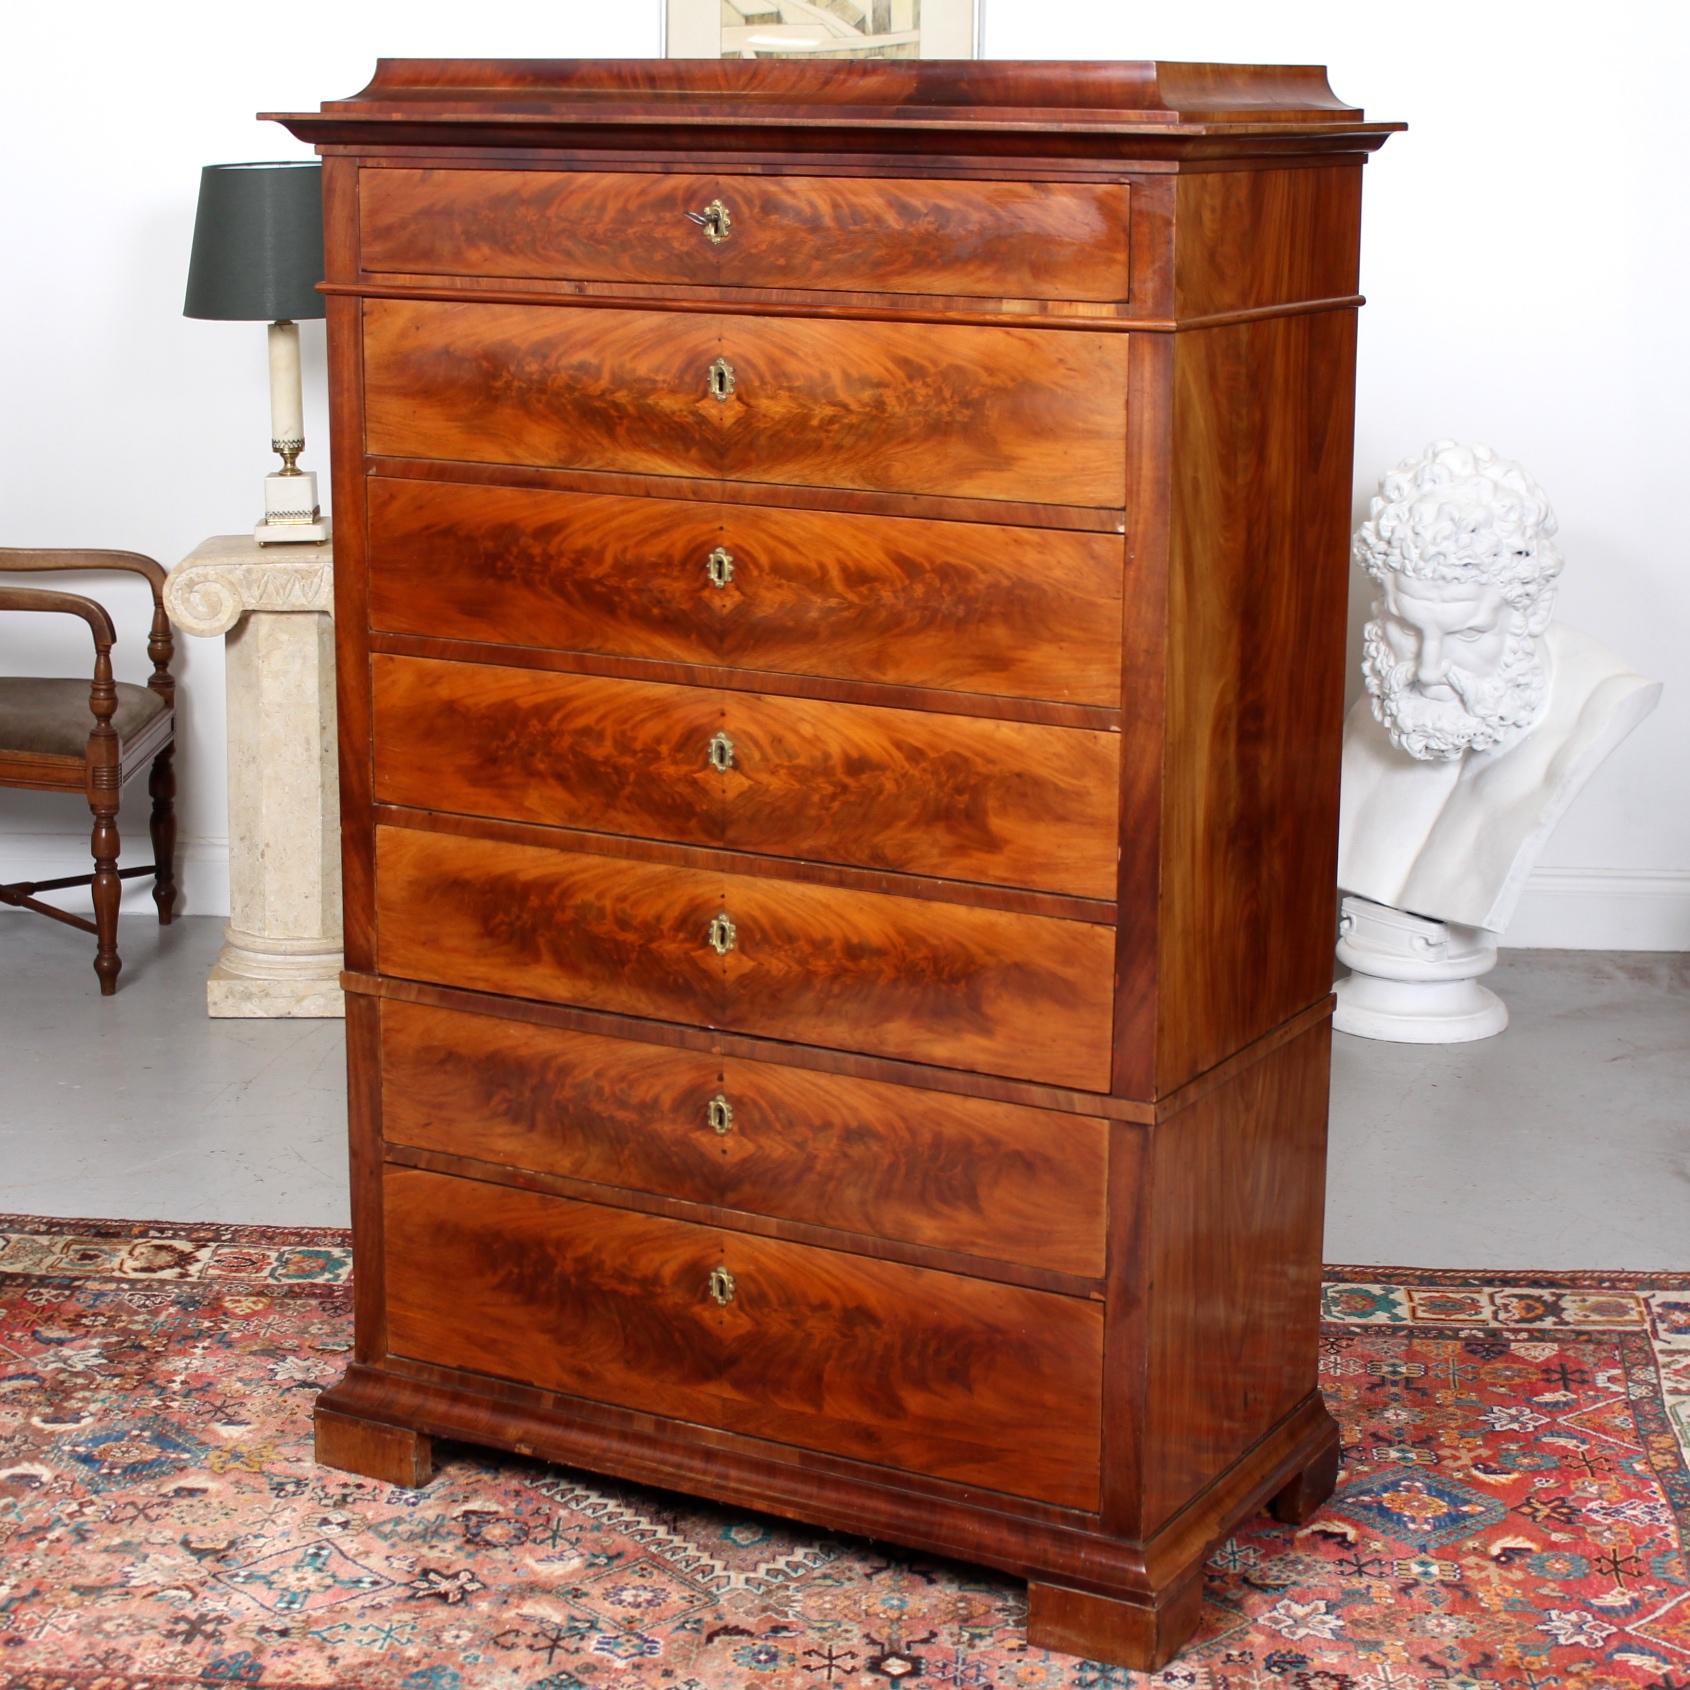 An impressive 19th century Danish Biedermeier semainier tallboy chest of drawers.

Boasting fine quality flamed mahogany marquetry work throughout.

The top with the distinctive Biedermeier pagoda top above seven long graduated drawers with oak